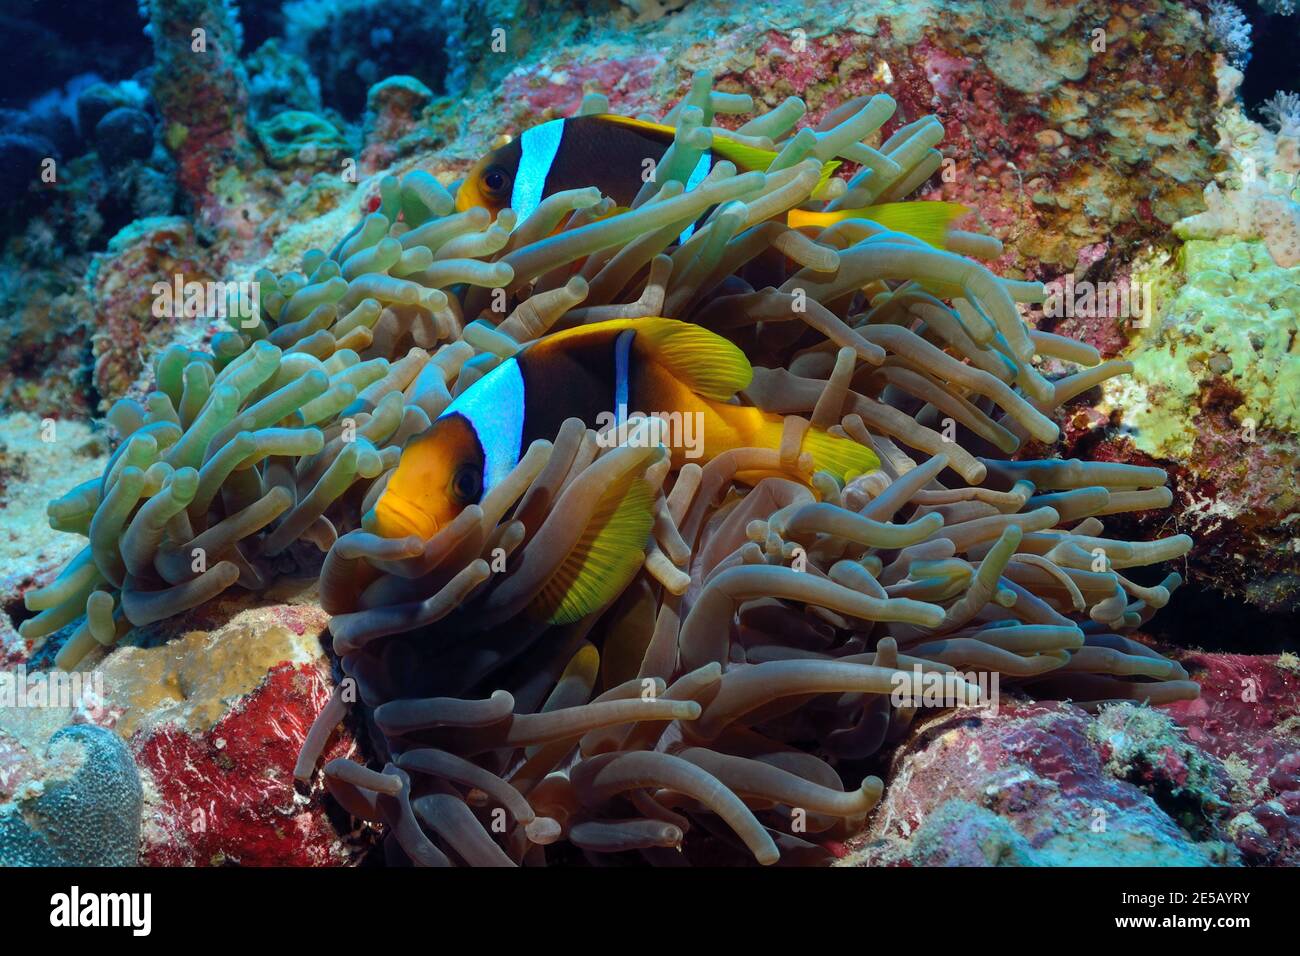 Amphiprion bicinctus, red sea anemonefish, red sea clownfish, Rotmeer-Anemonenfisch, Coraya Beach, Rotes Meer, Ägypten, Red Sea, Egypt Stock Photo